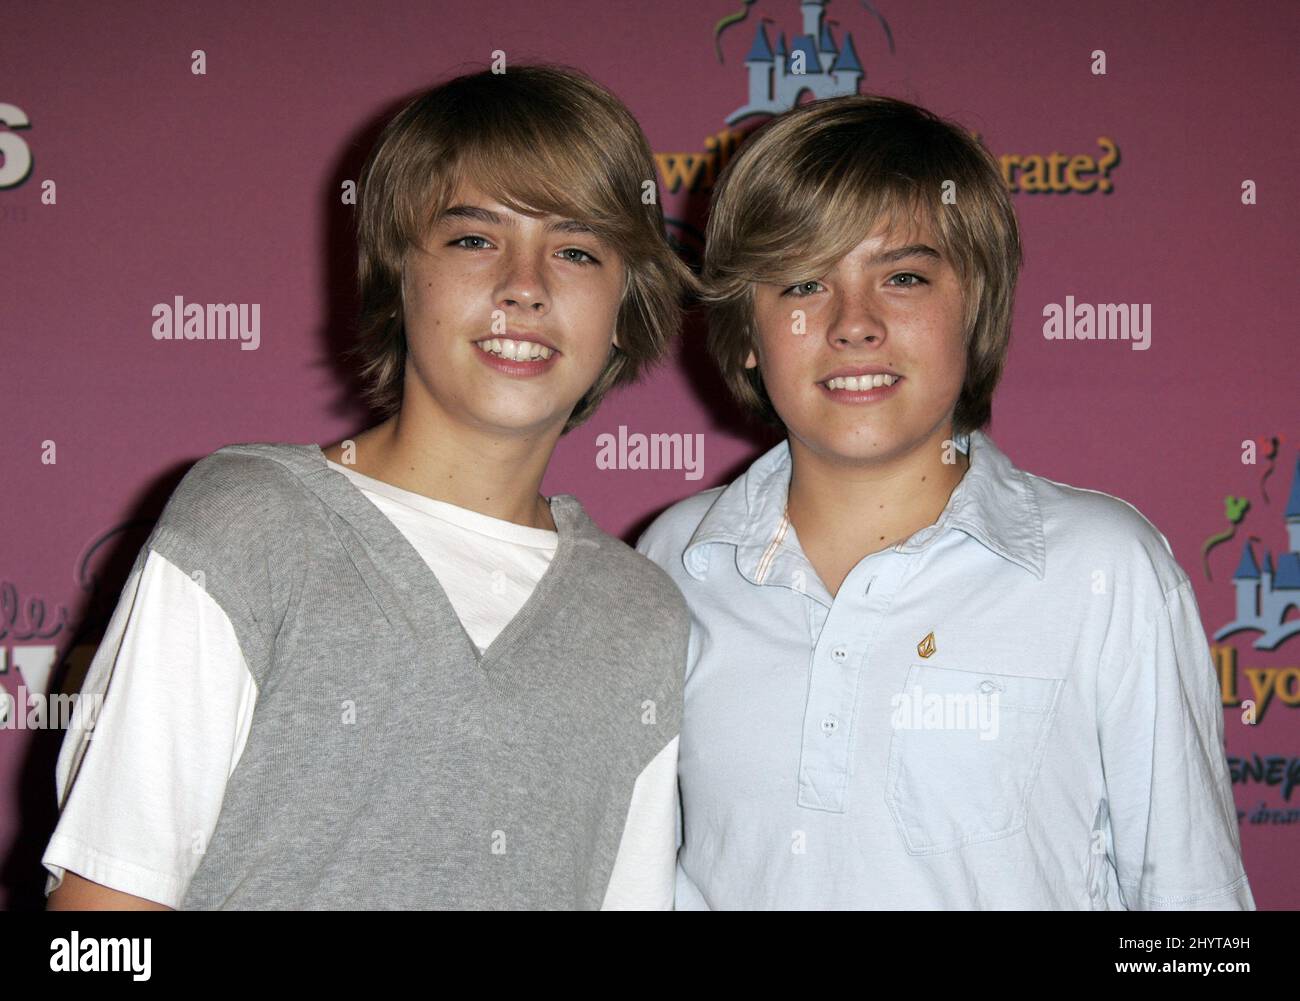 Dylan Sprouse and Cole Sprouse attend Miley Cyrus' Sweet 16 Birthday Bash, held at Disneyland. Stock Photo